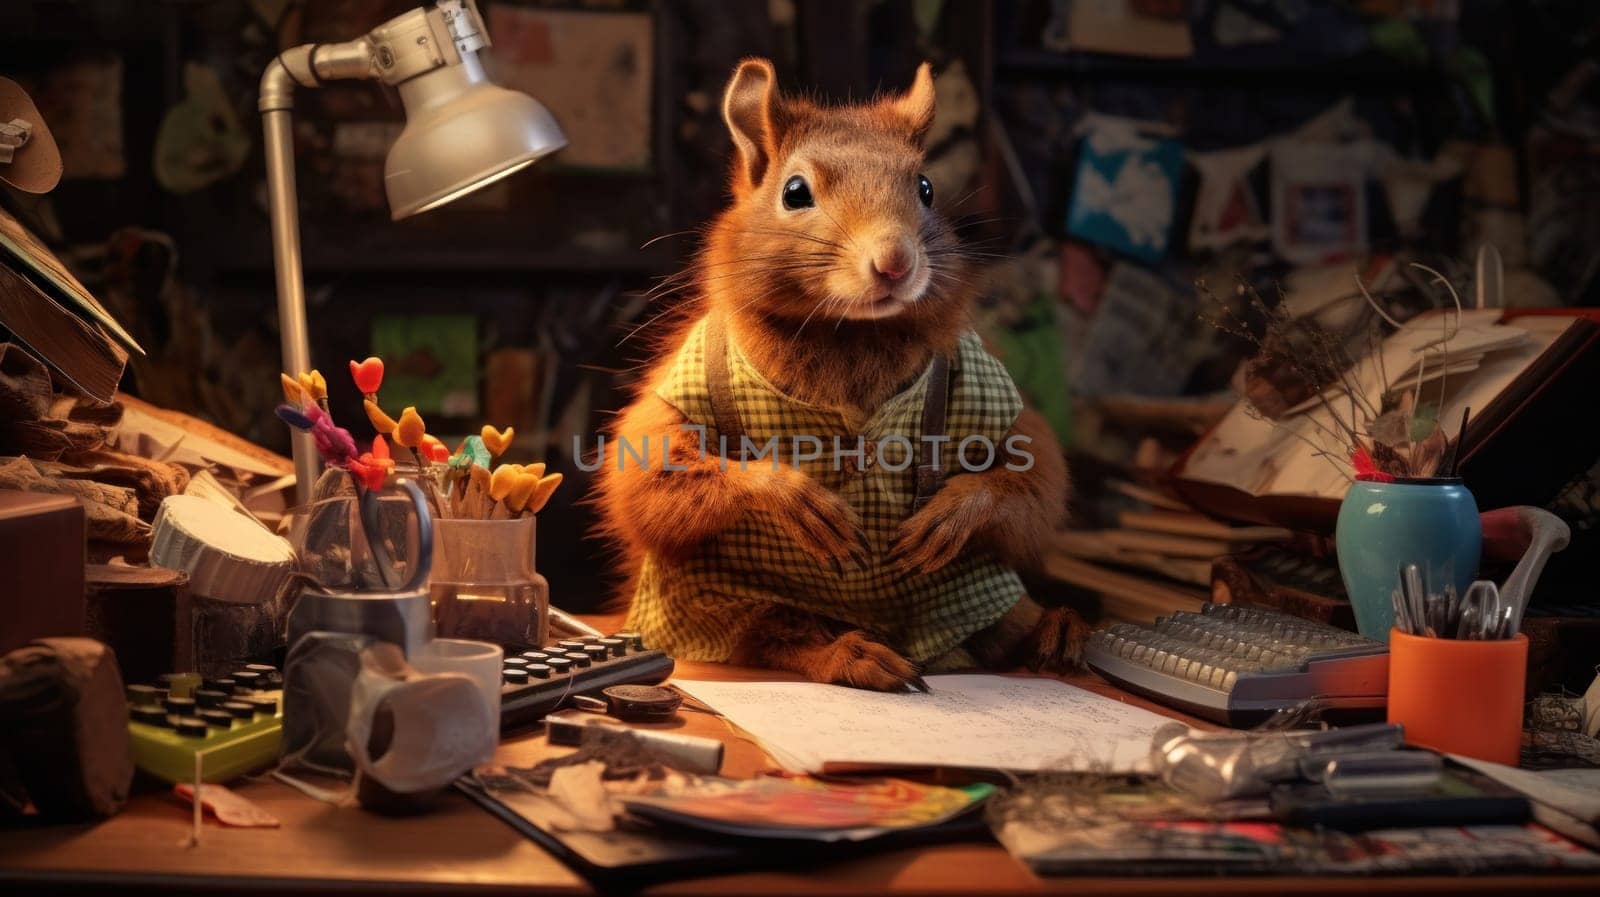 A squirrel sitting on a desk with papers and other items